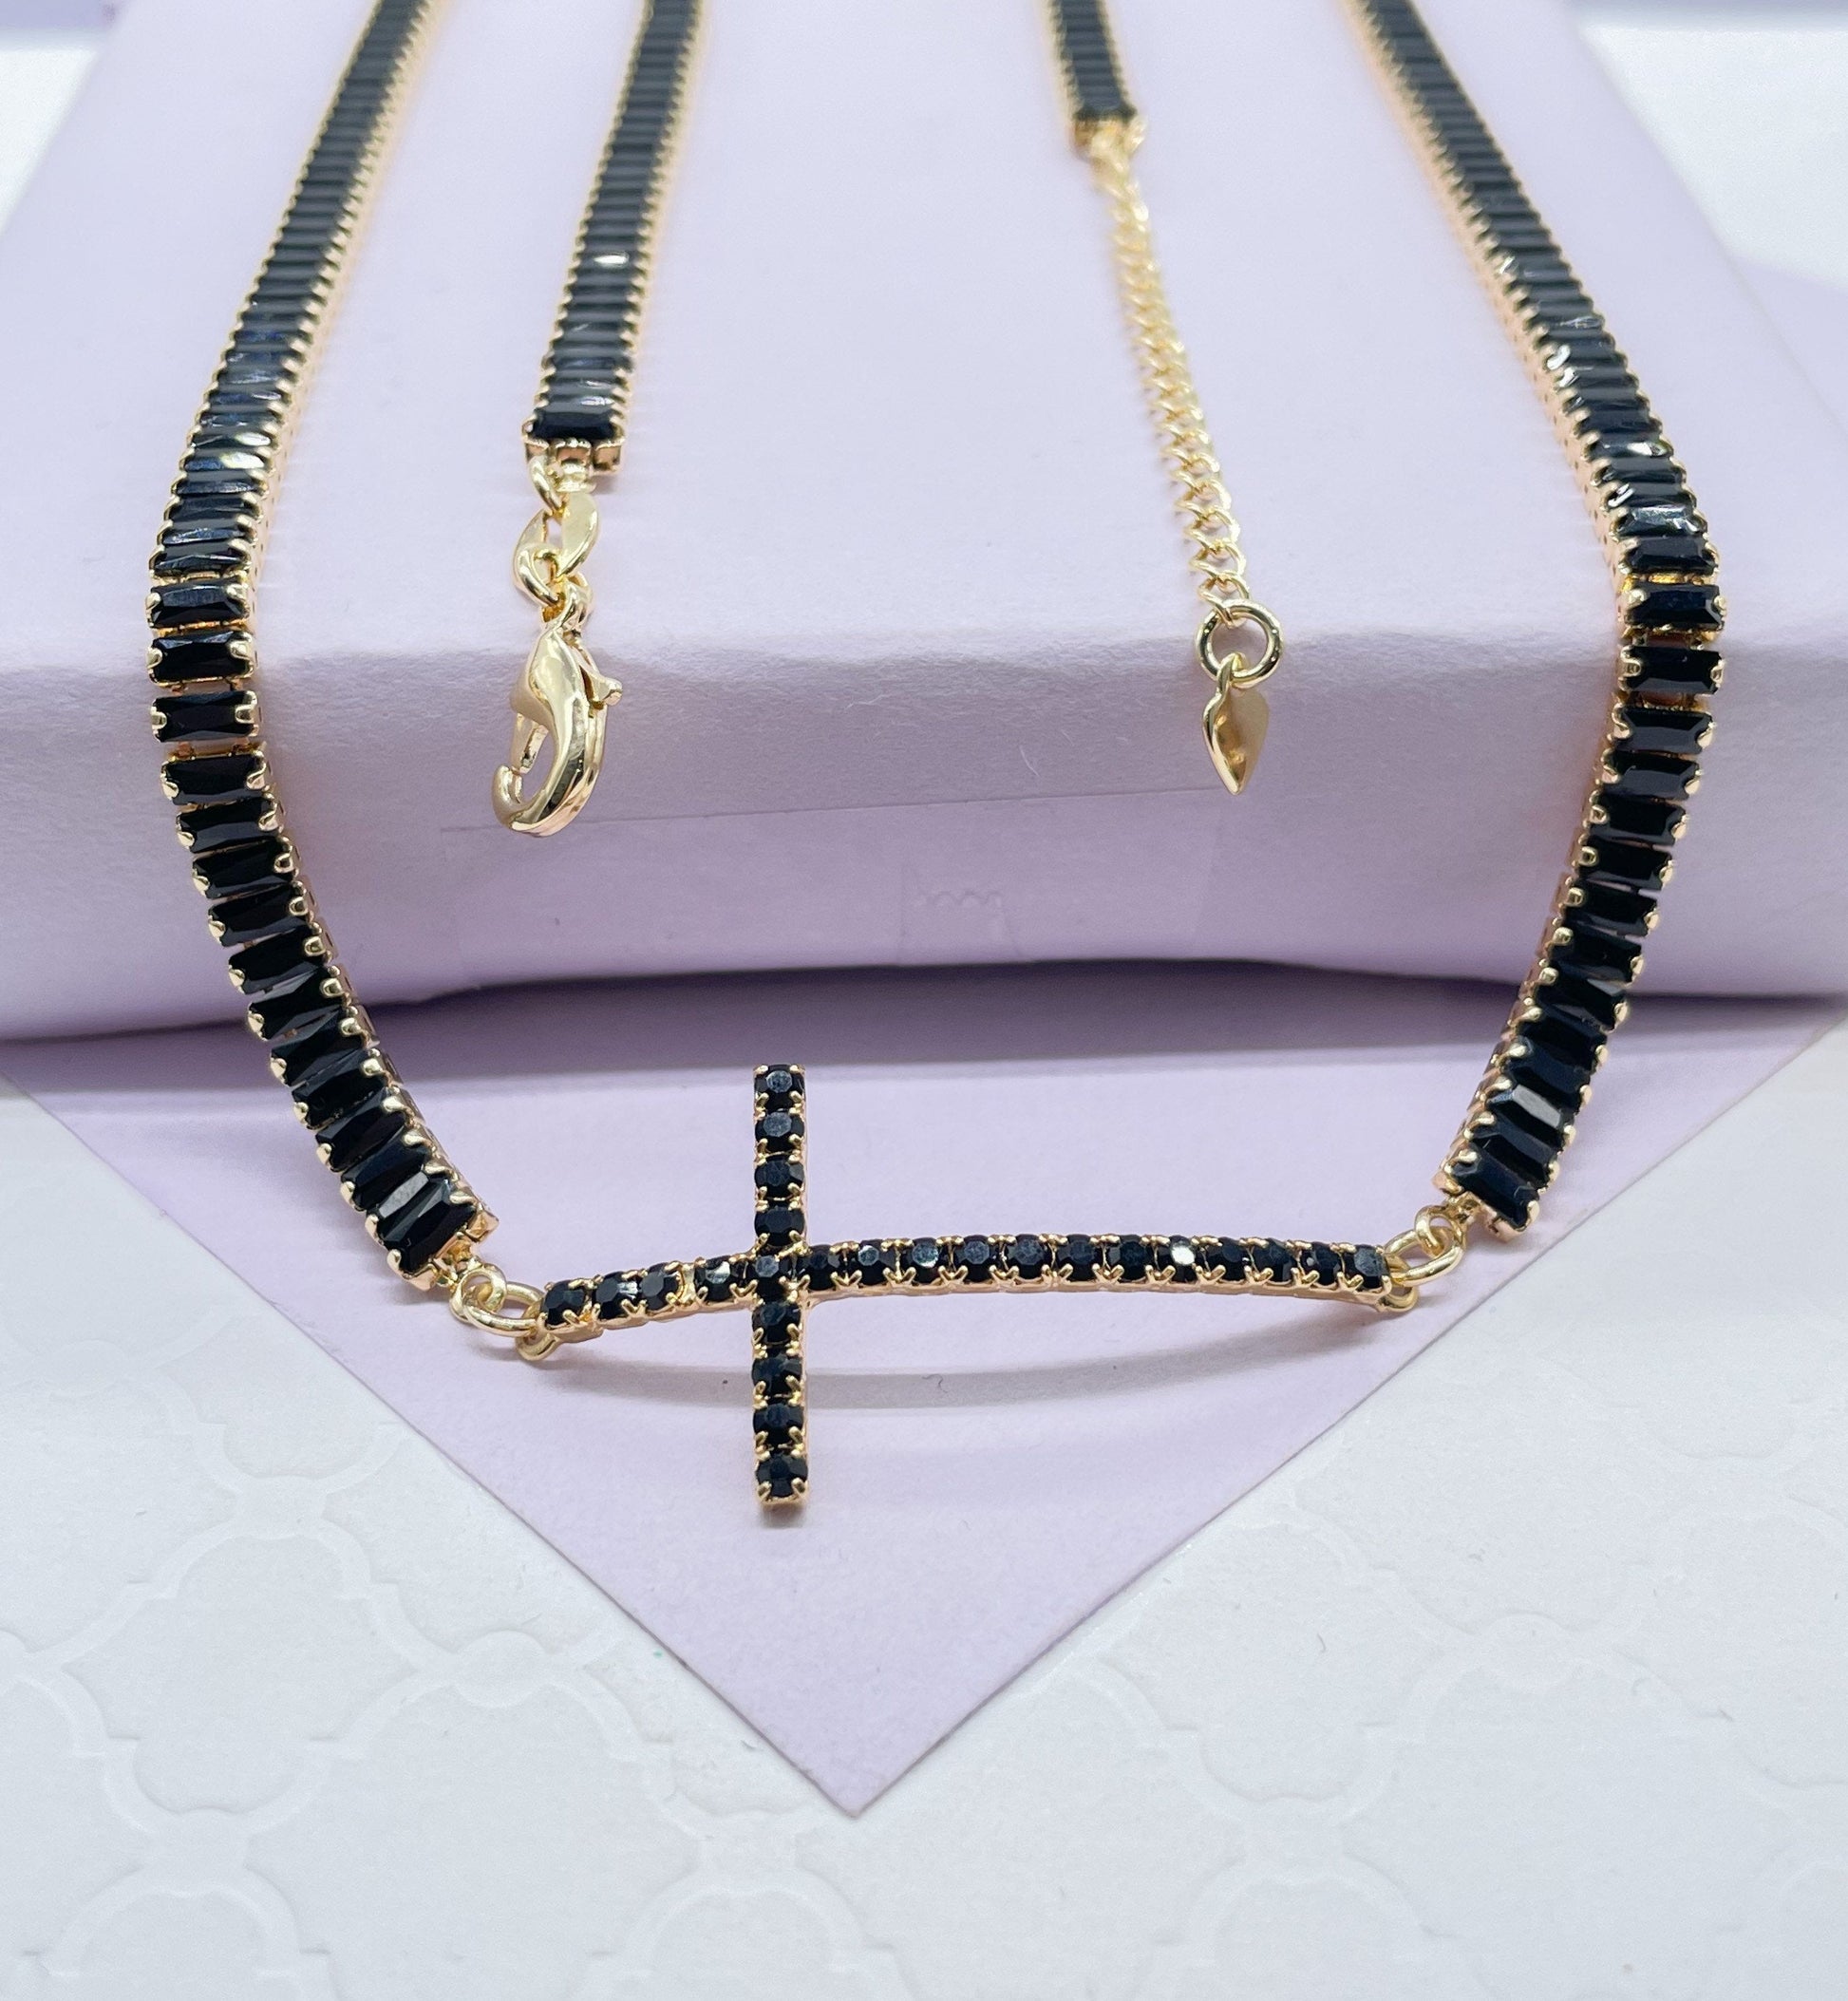 18k Gold Filled Baguette Choker With CZ Pavè Cross In The Center